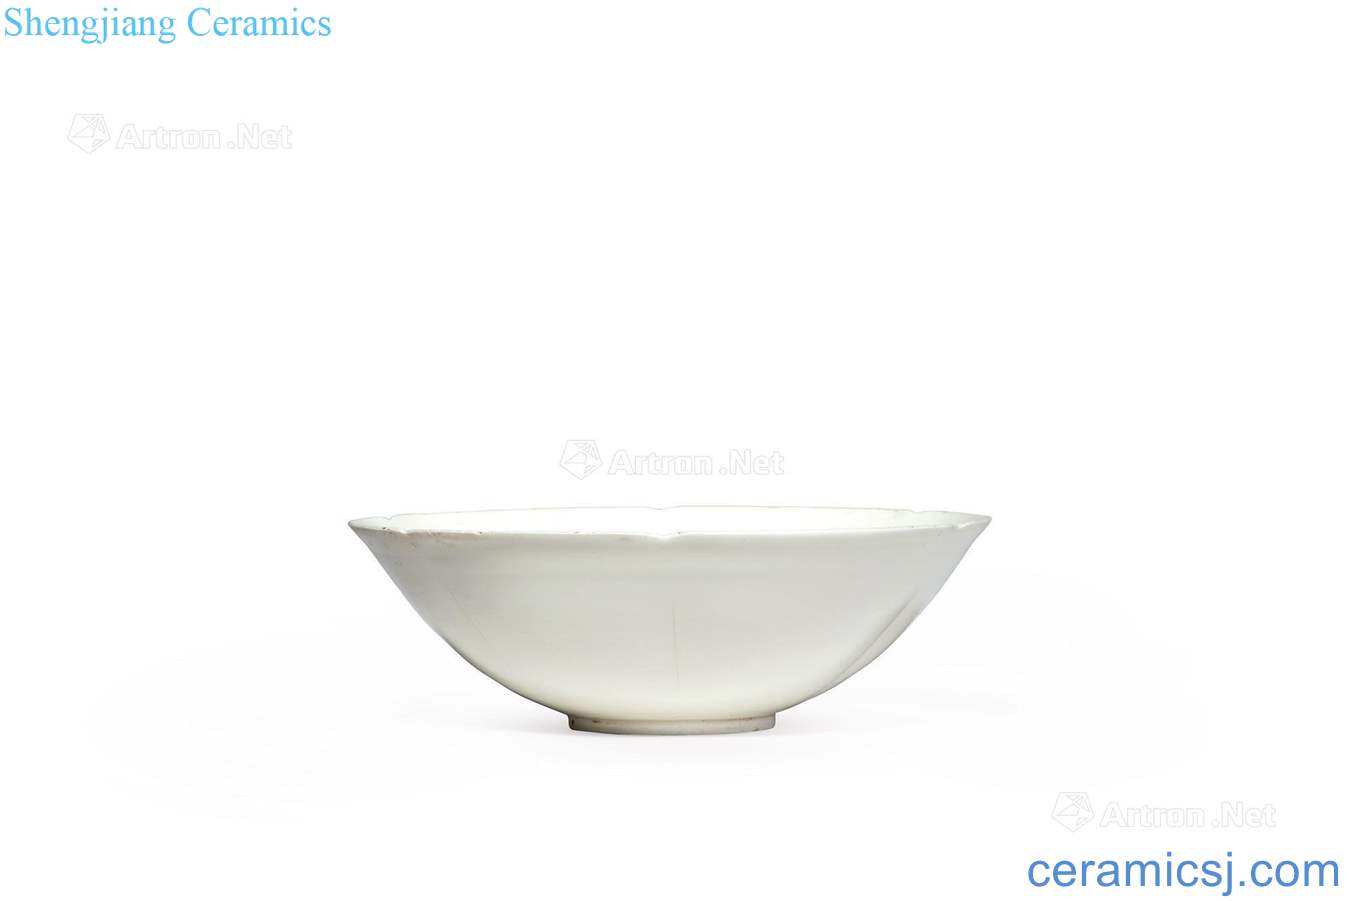 The song kiln craft flower mouth Pisces green-splashed bowls